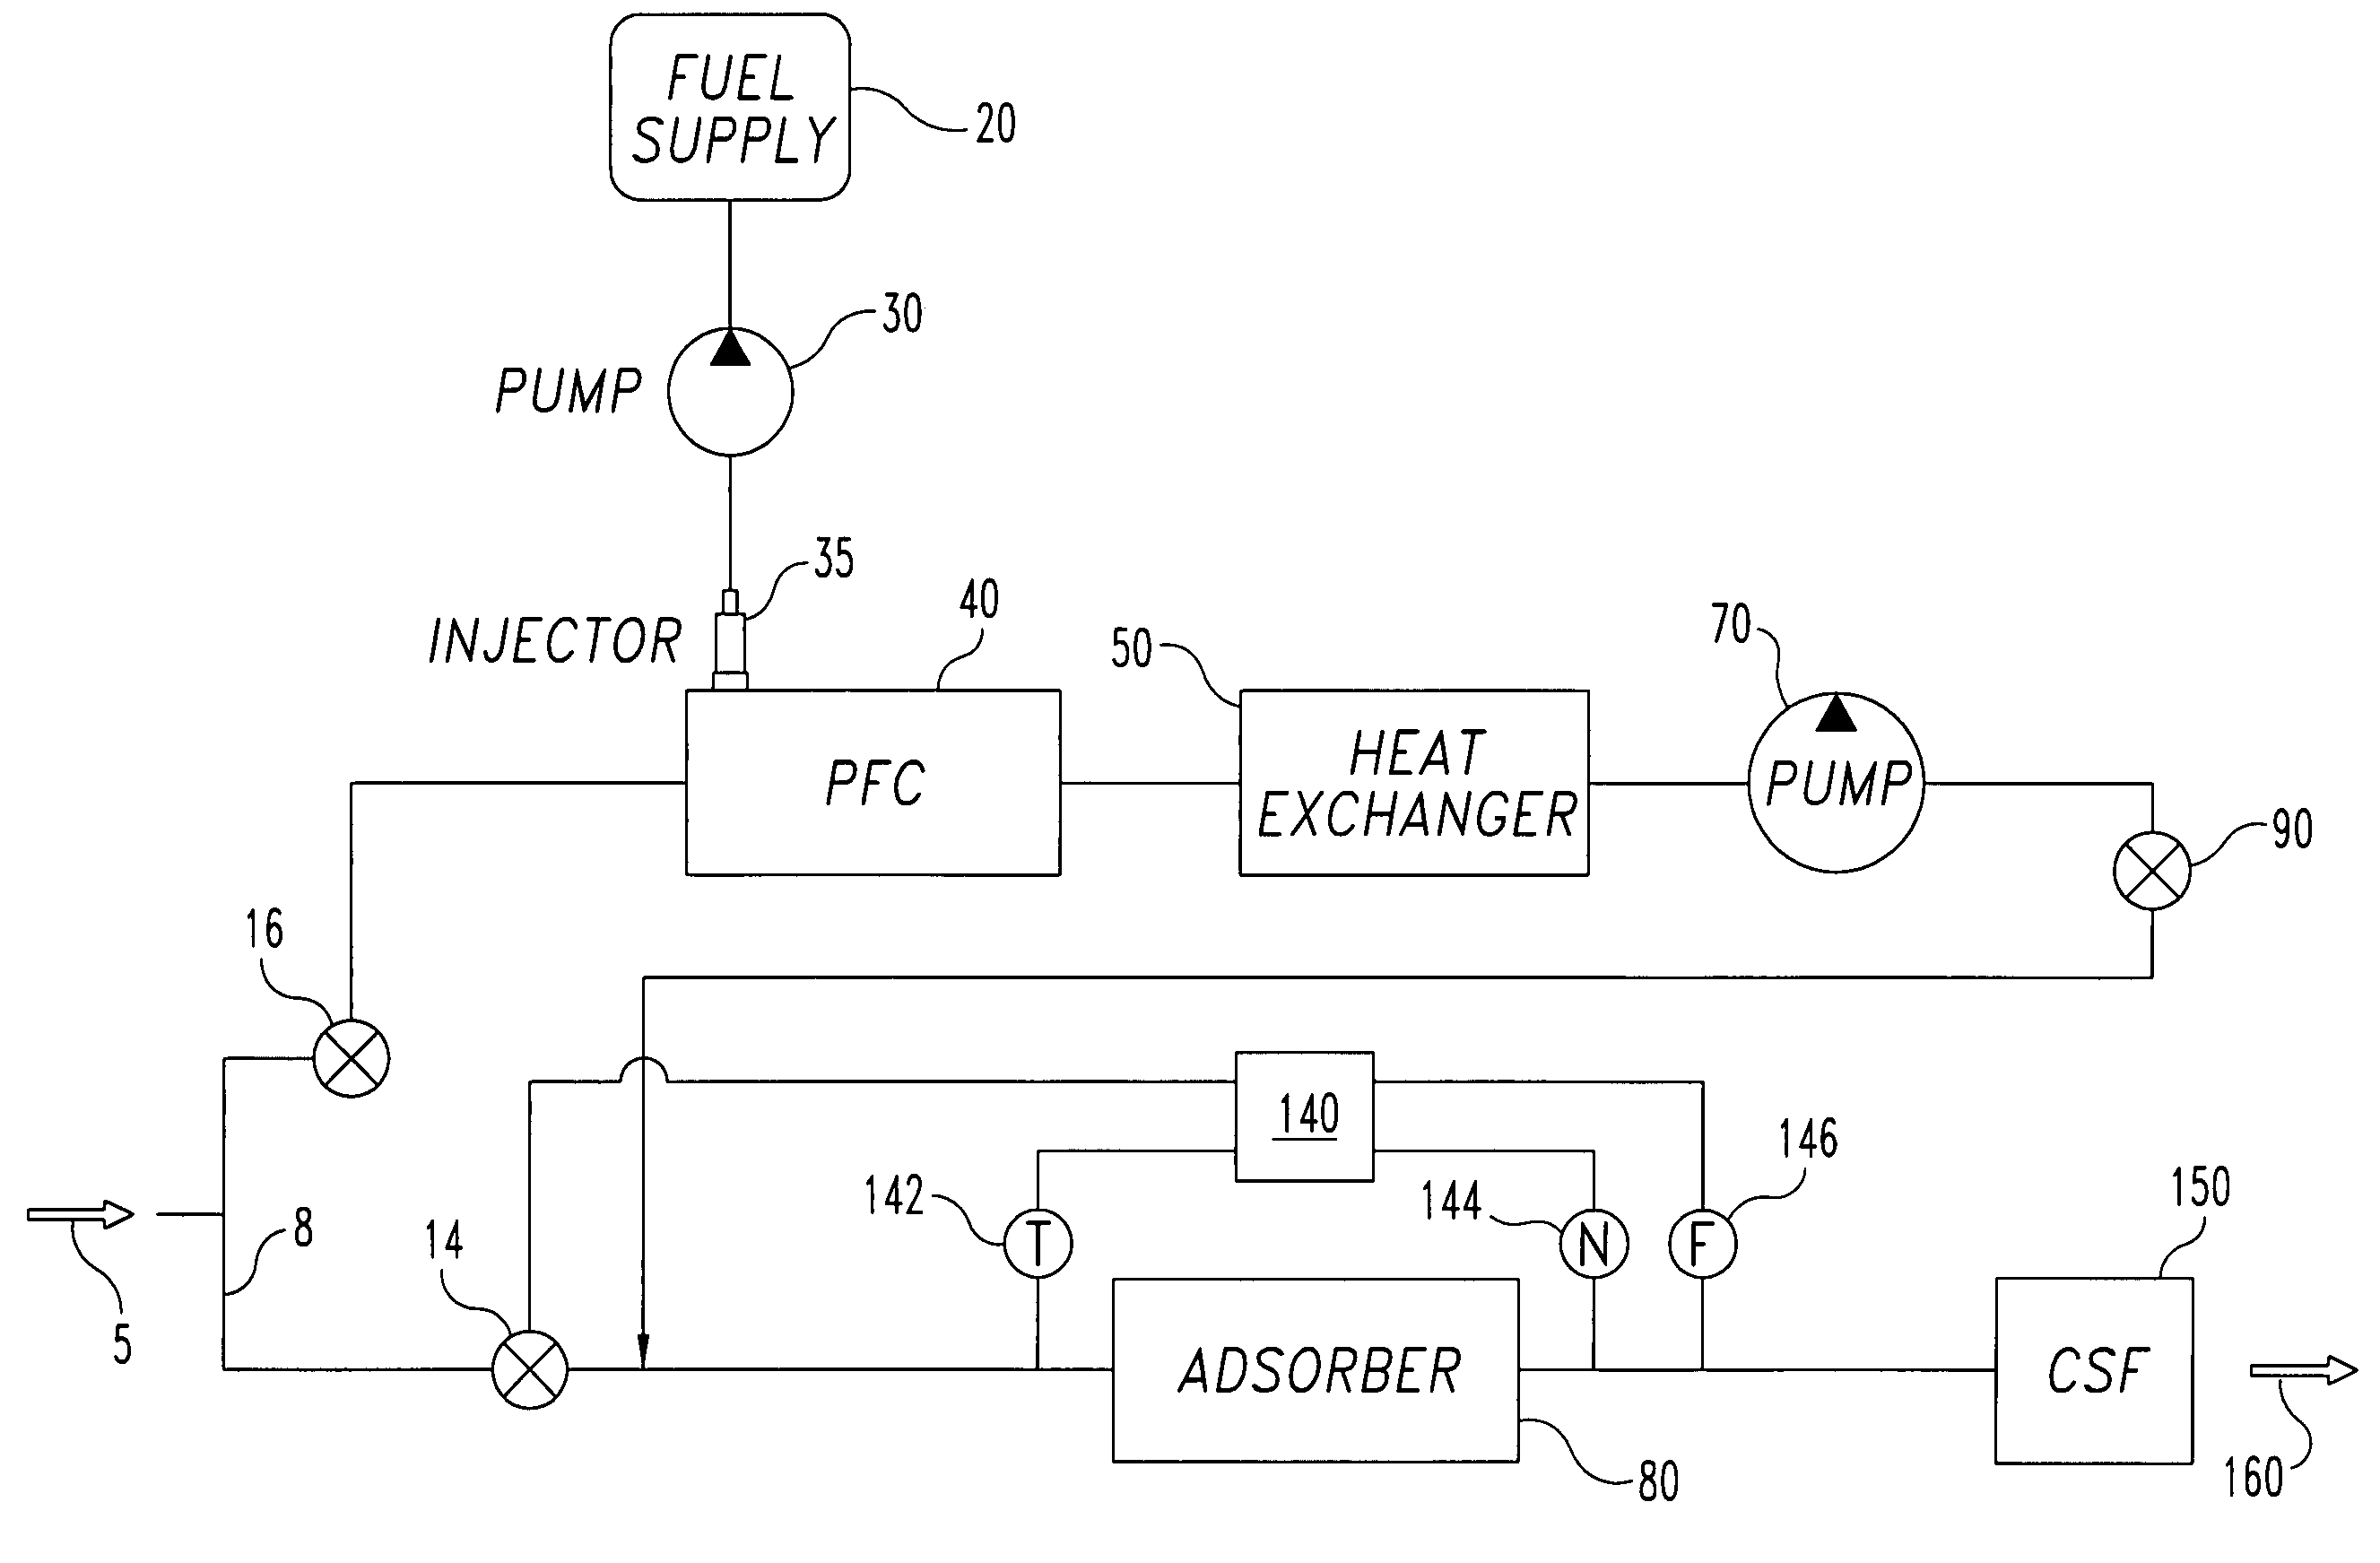 Plasma fuel converter NOx adsorber system for exhaust aftertreatment